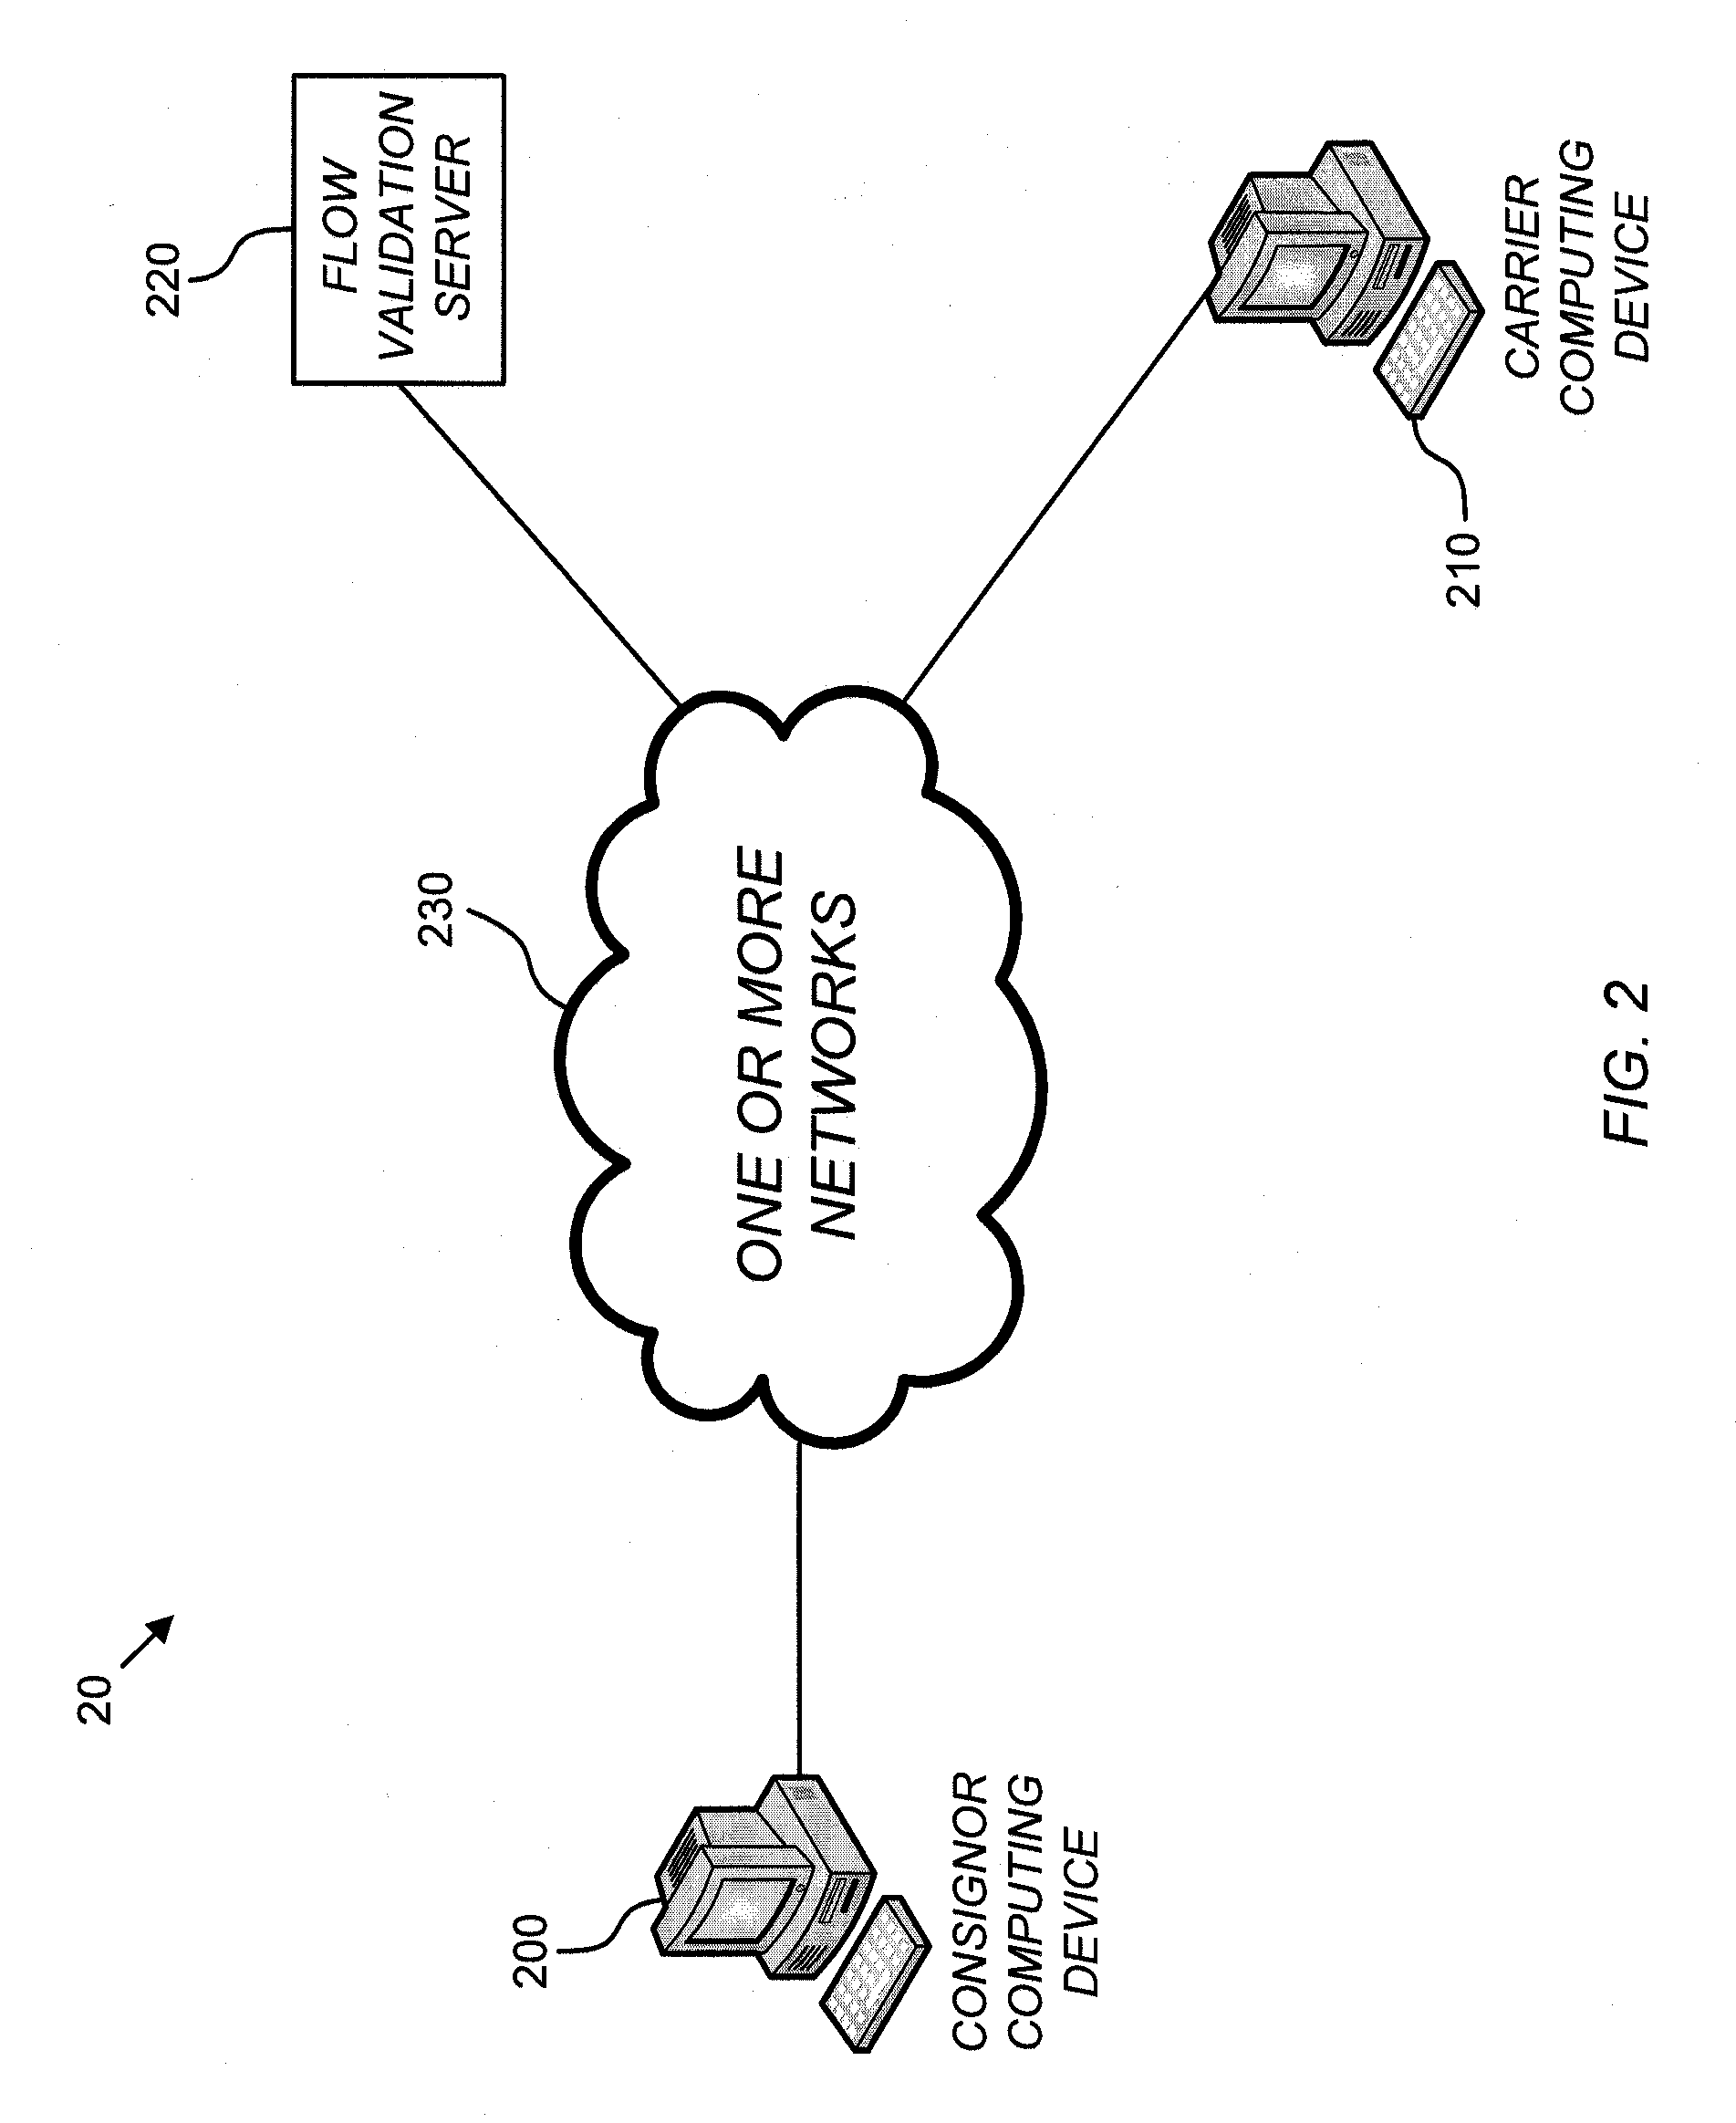 Shipment flow validation systems and methods